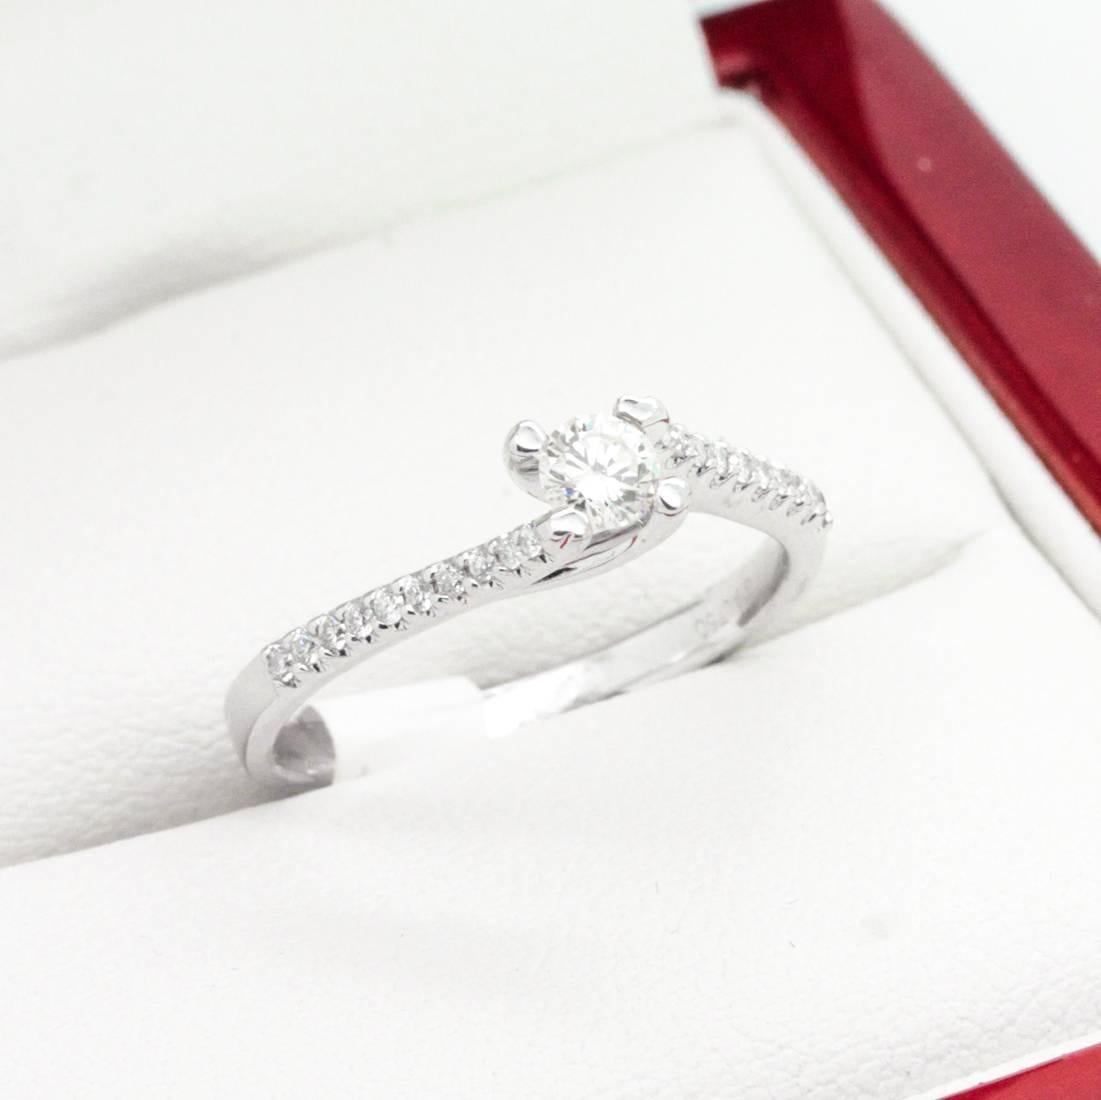 Crossover Diamond and White Gold Modern Engagement Ring

Gorgeous 18ct White Gold Diamond Ring featuring one round brilliant cut Diamond, 4 claw set at the center, with 10 tiny round brilliant cut Diamonds micro claw set in each upswept slightly